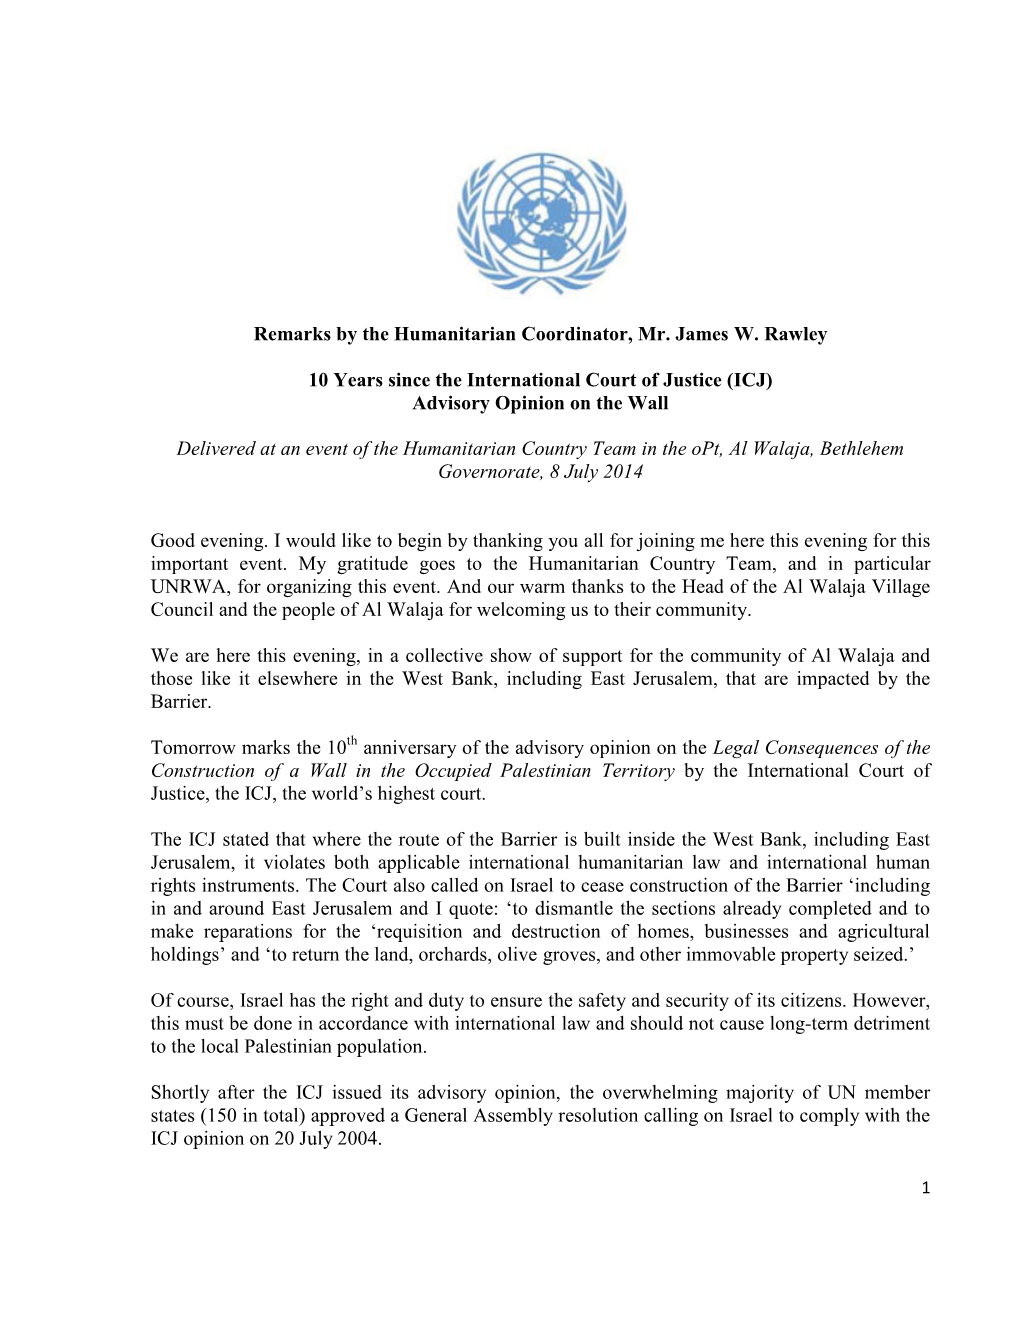 Remarks by the Humanitarian Coordinator, Mr. James W. Rawley 10 Years Since the International Court of Justice (ICJ) Advisory